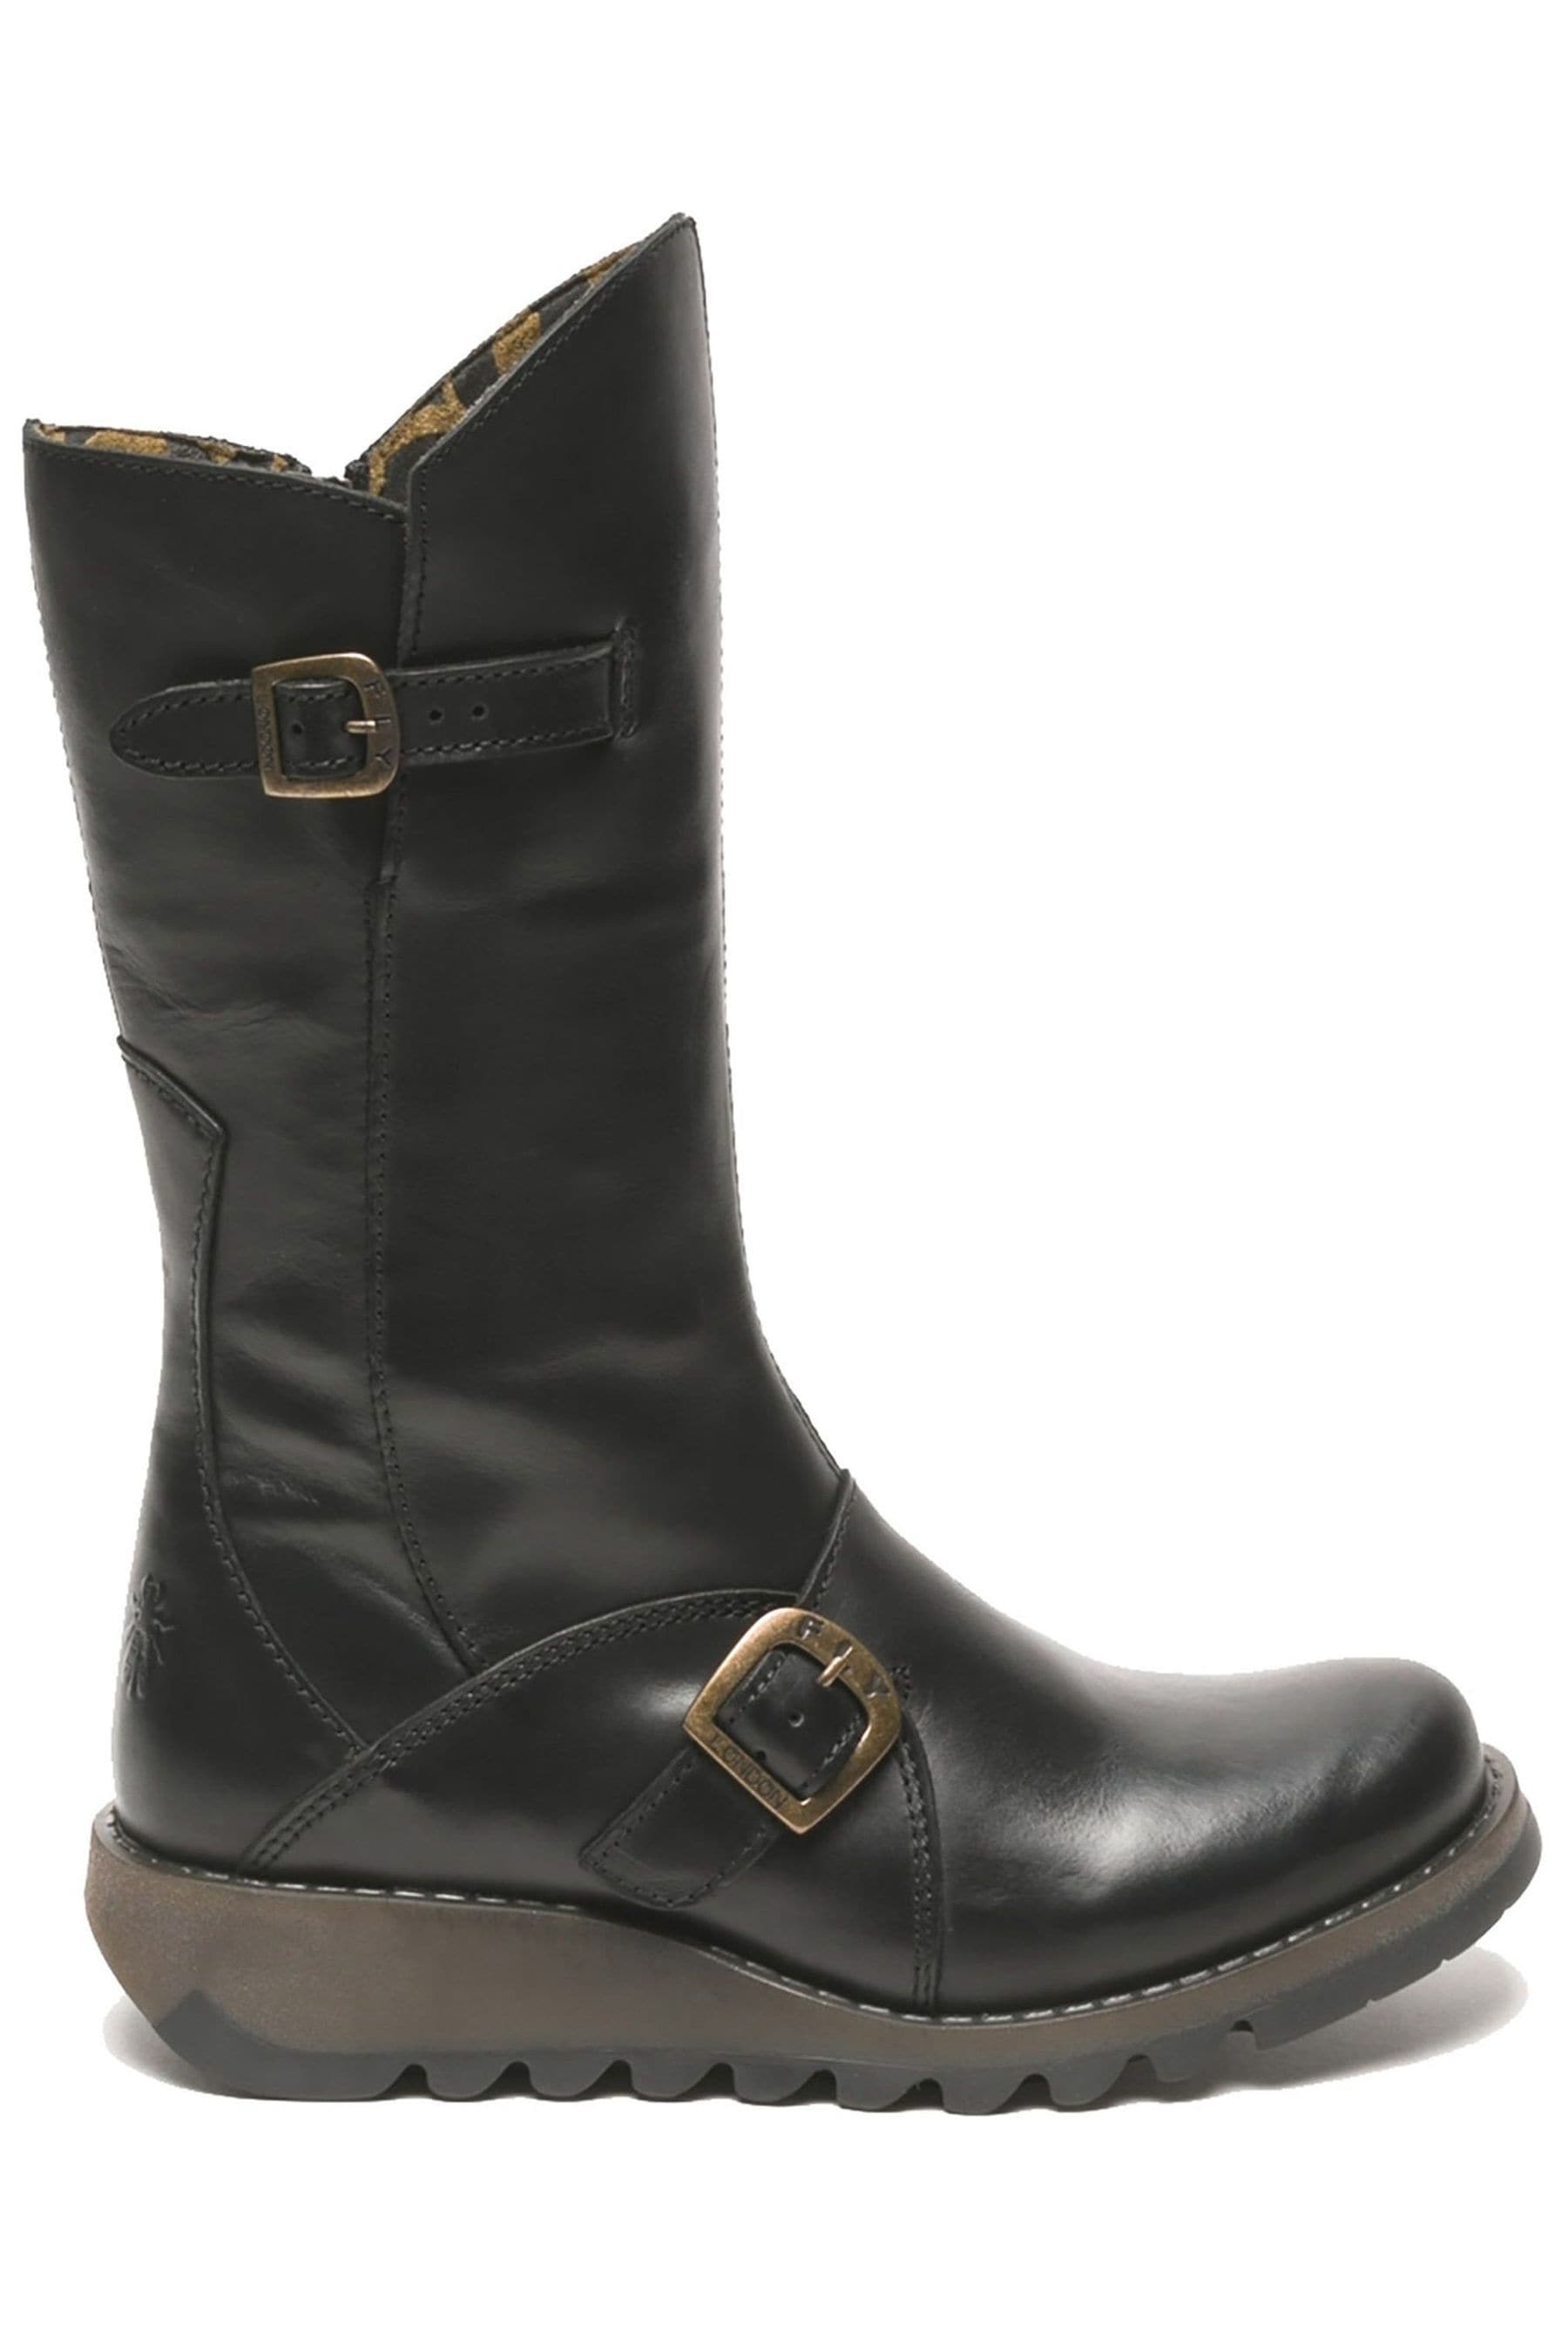 Buy Fly London Mid Calf Boots from the Next UK online shop